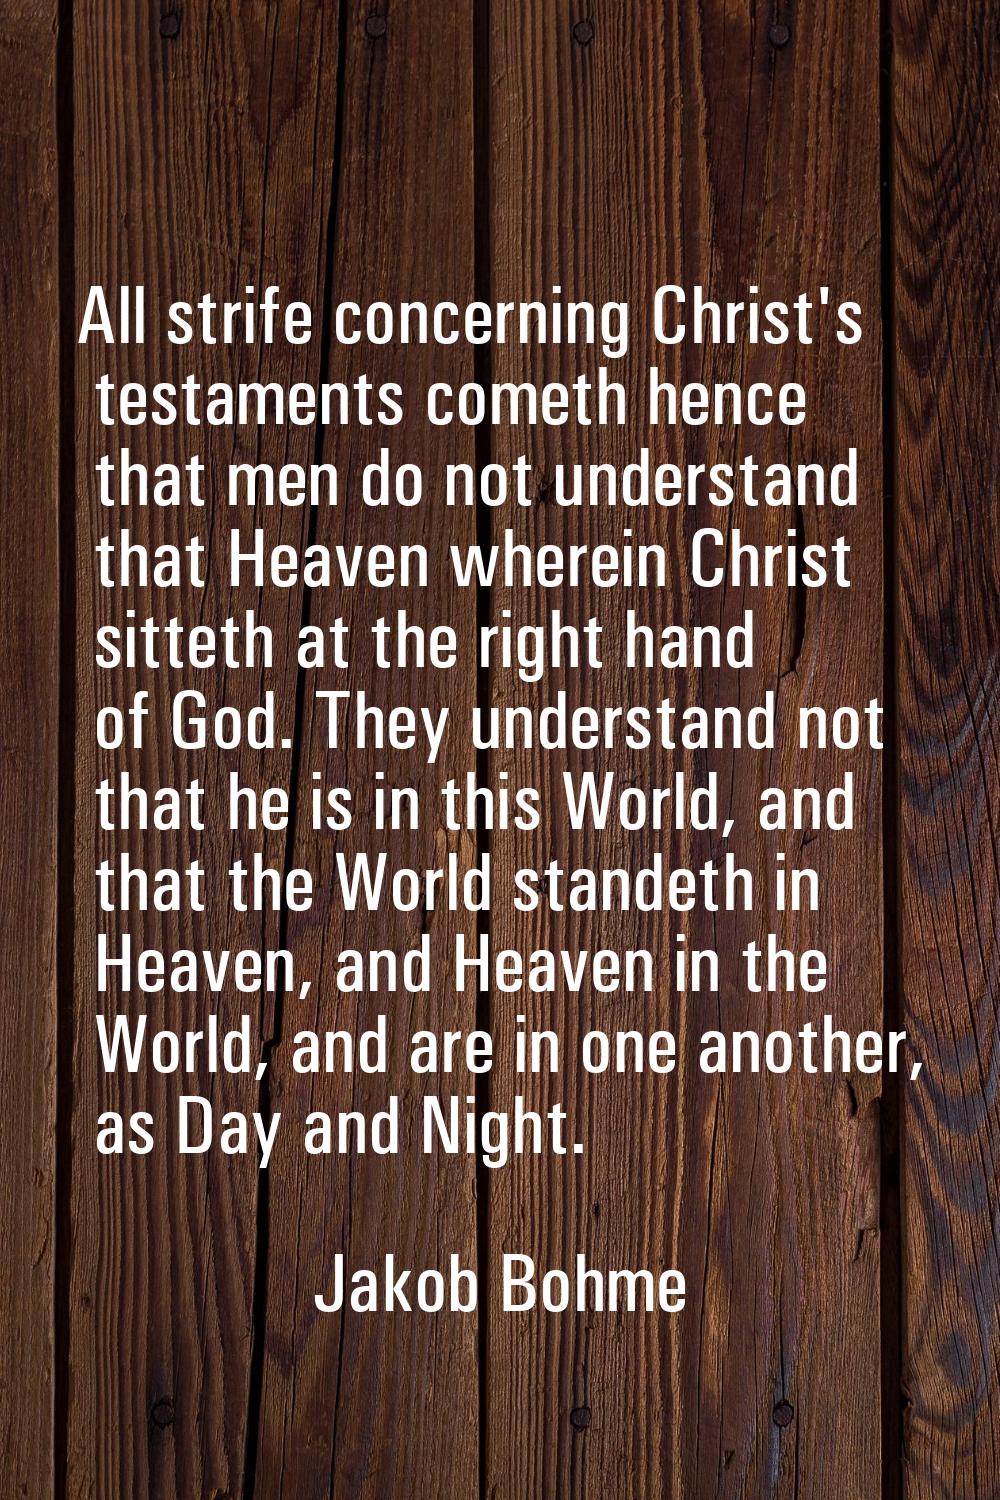 All strife concerning Christ's testaments cometh hence that men do not understand that Heaven where